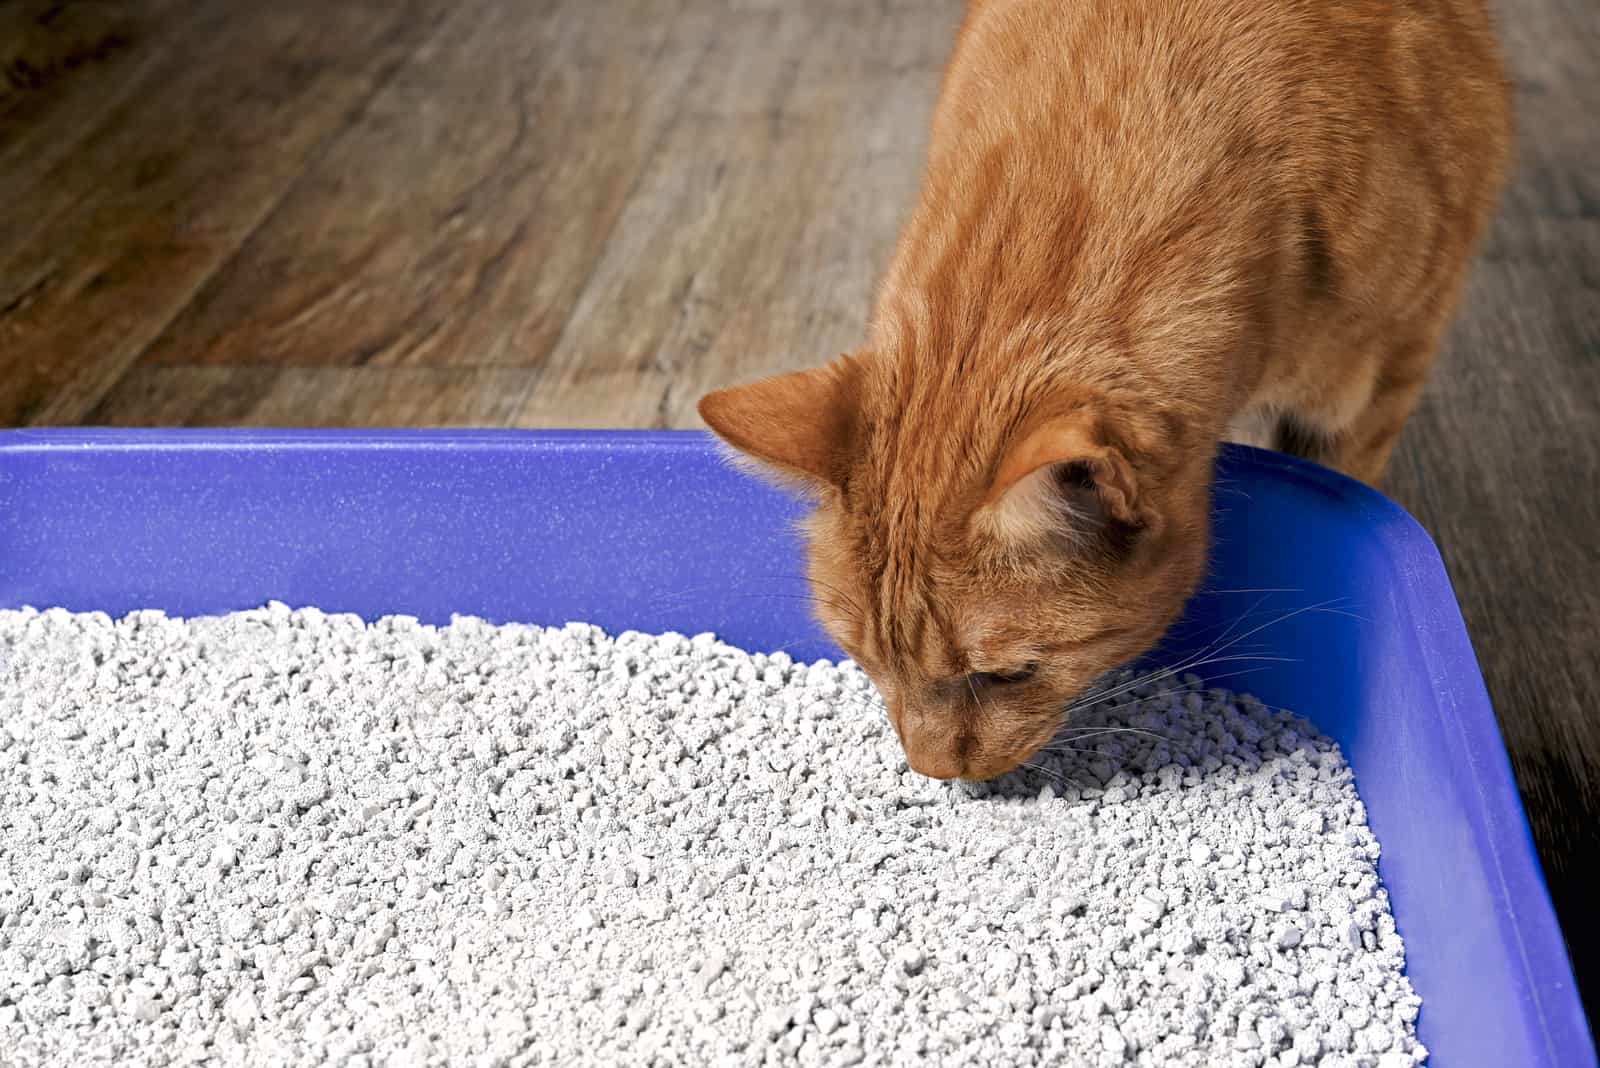 Cute ginger cat sniffs on cat litter in a blue tray.